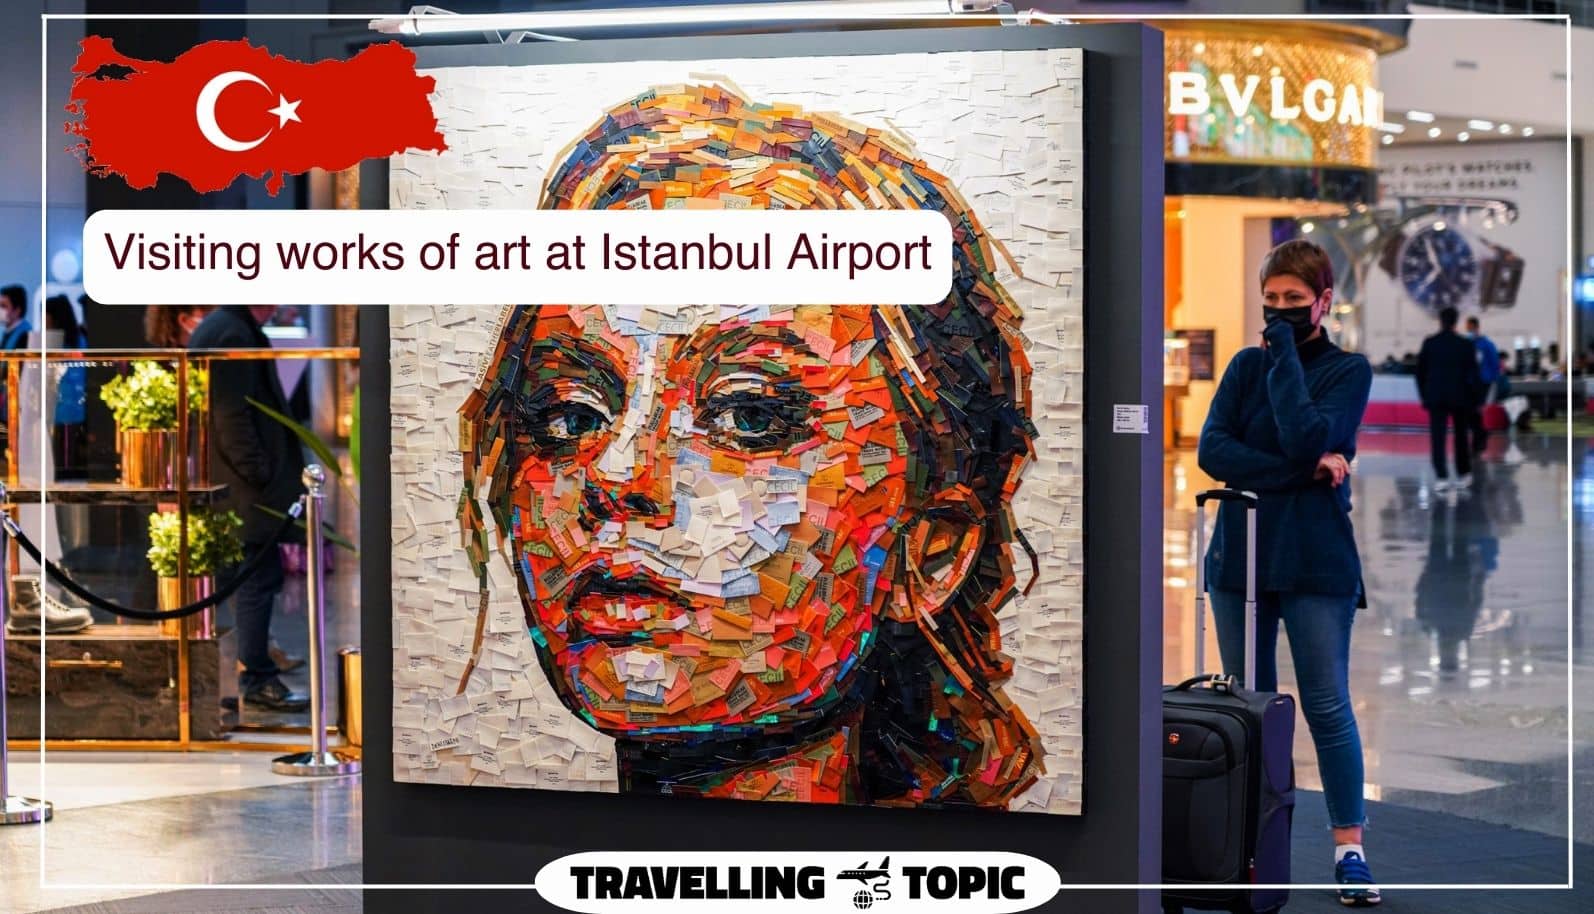 Visiting works of art at Istanbul Airport